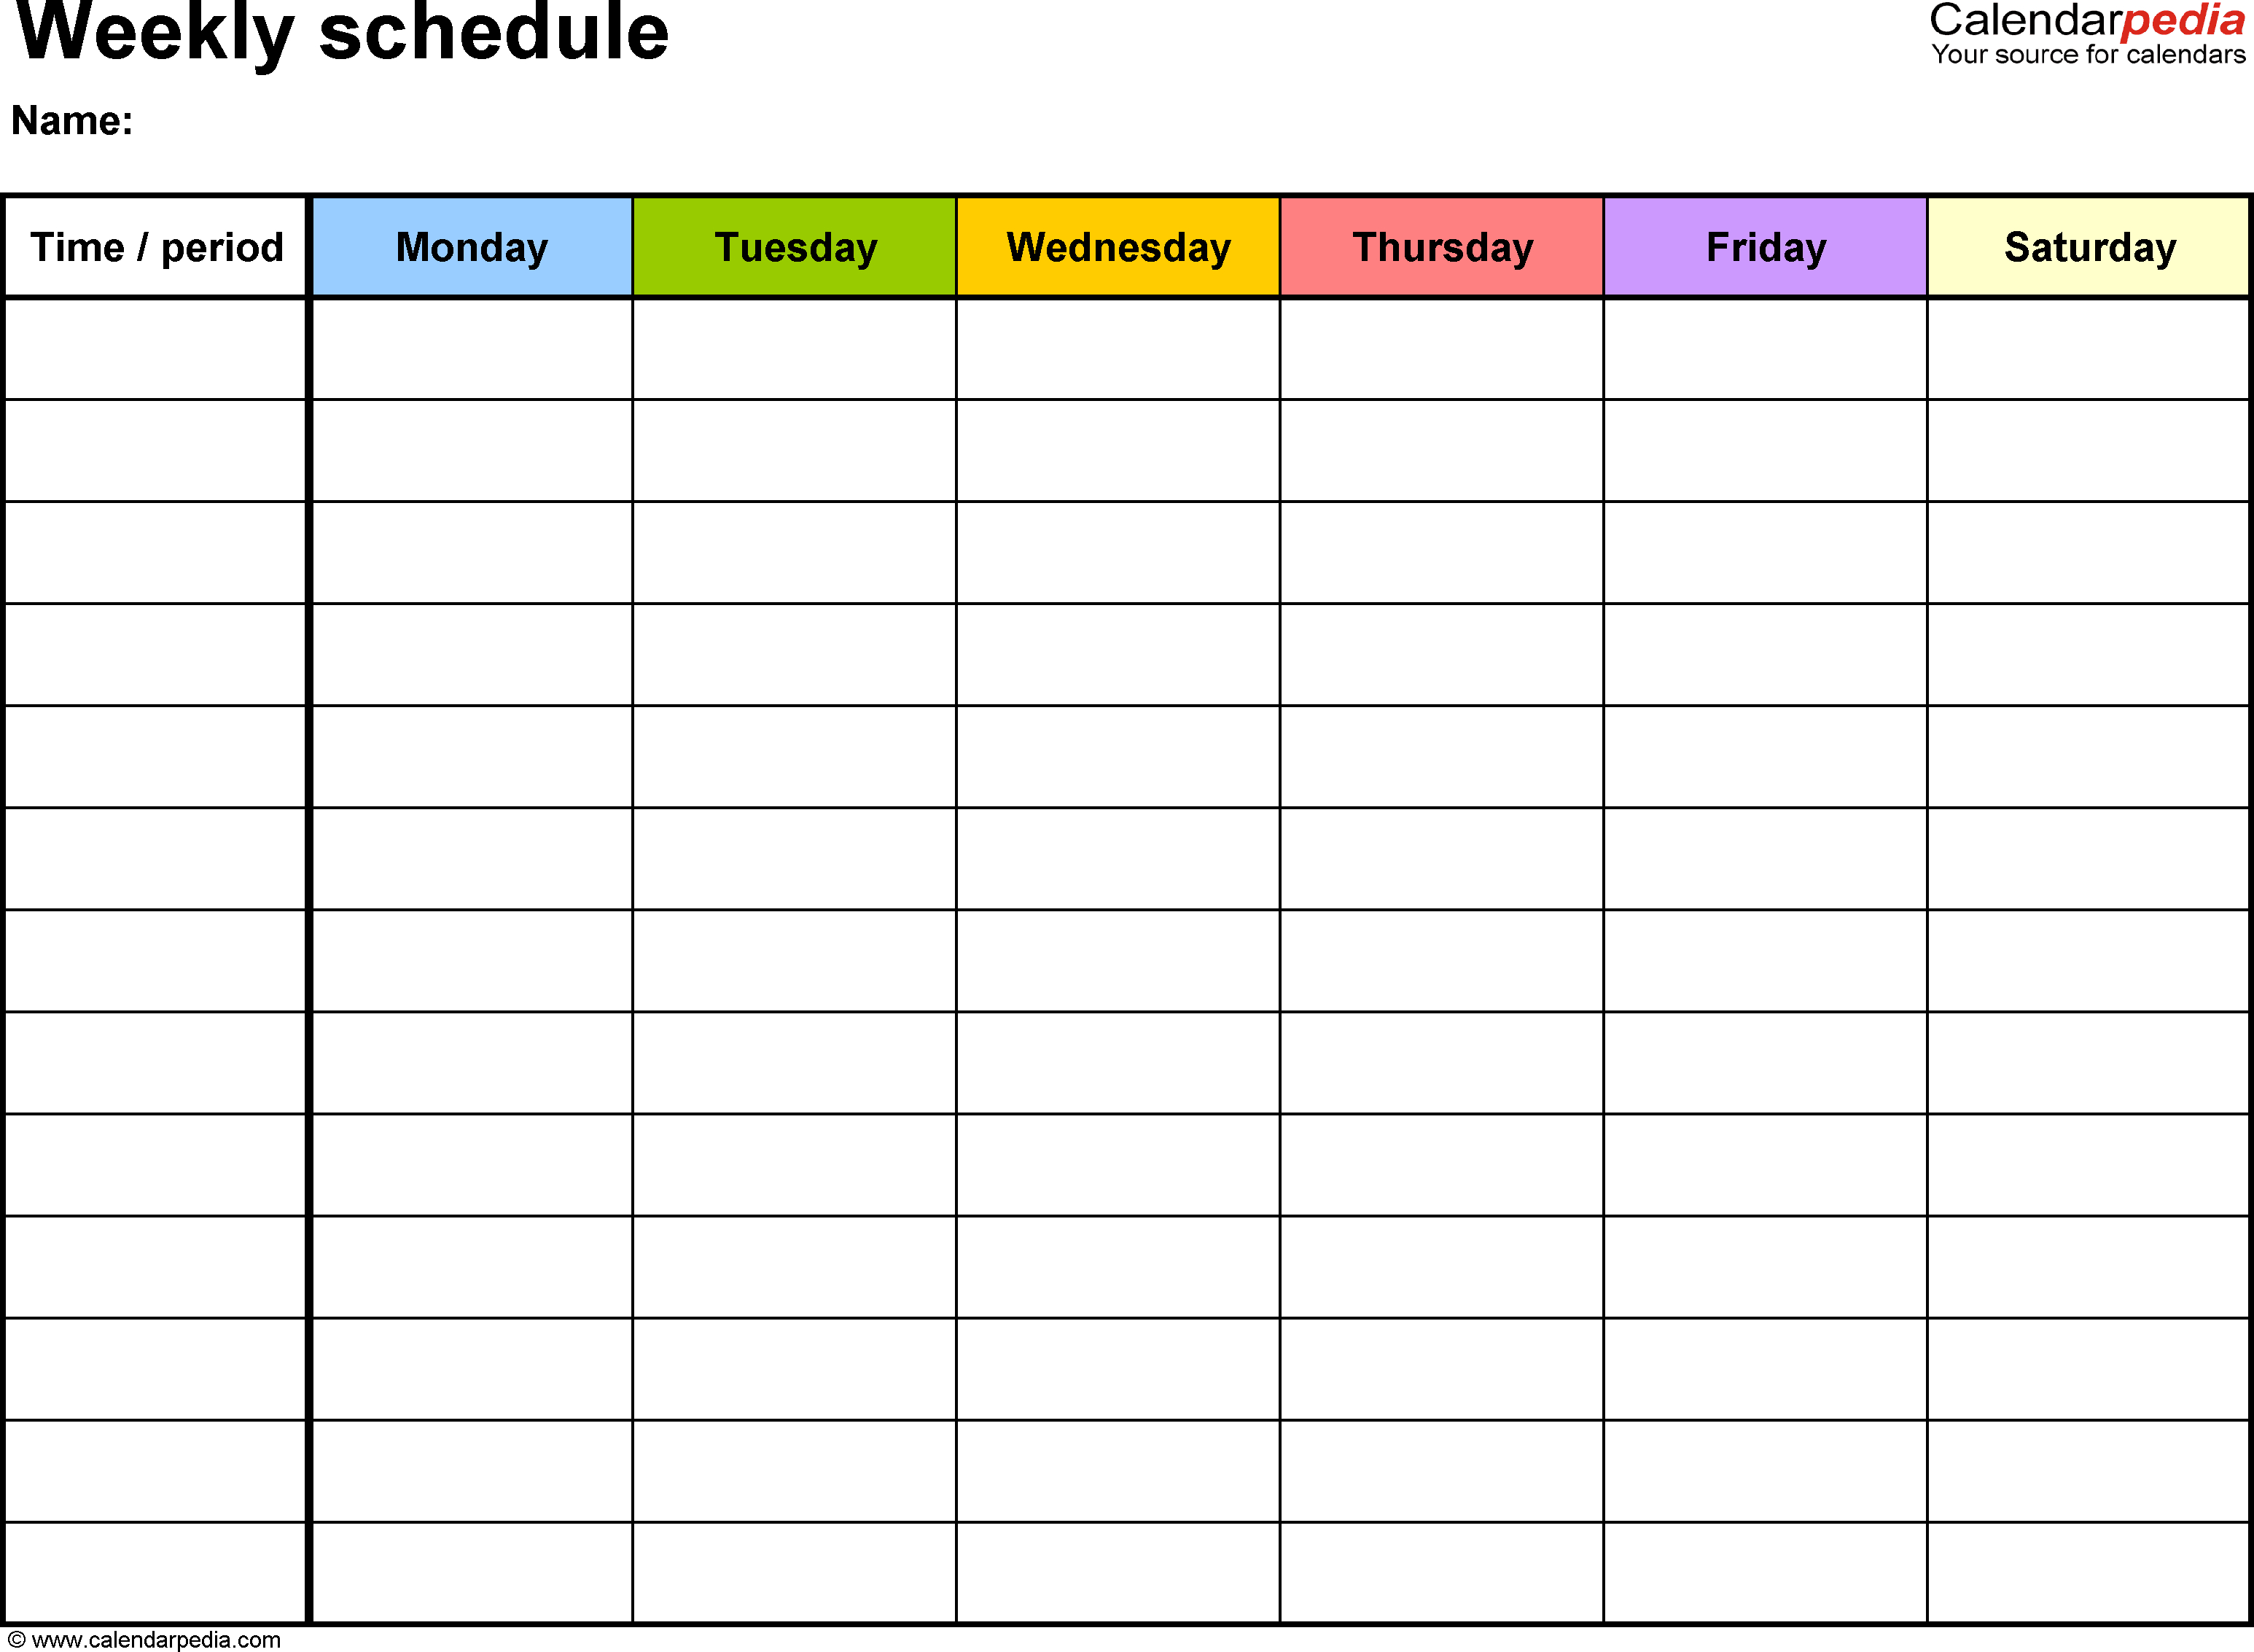 Free Weekly Schedule Templates For Word  18 Templates intended for 5 Day Calendar Printable